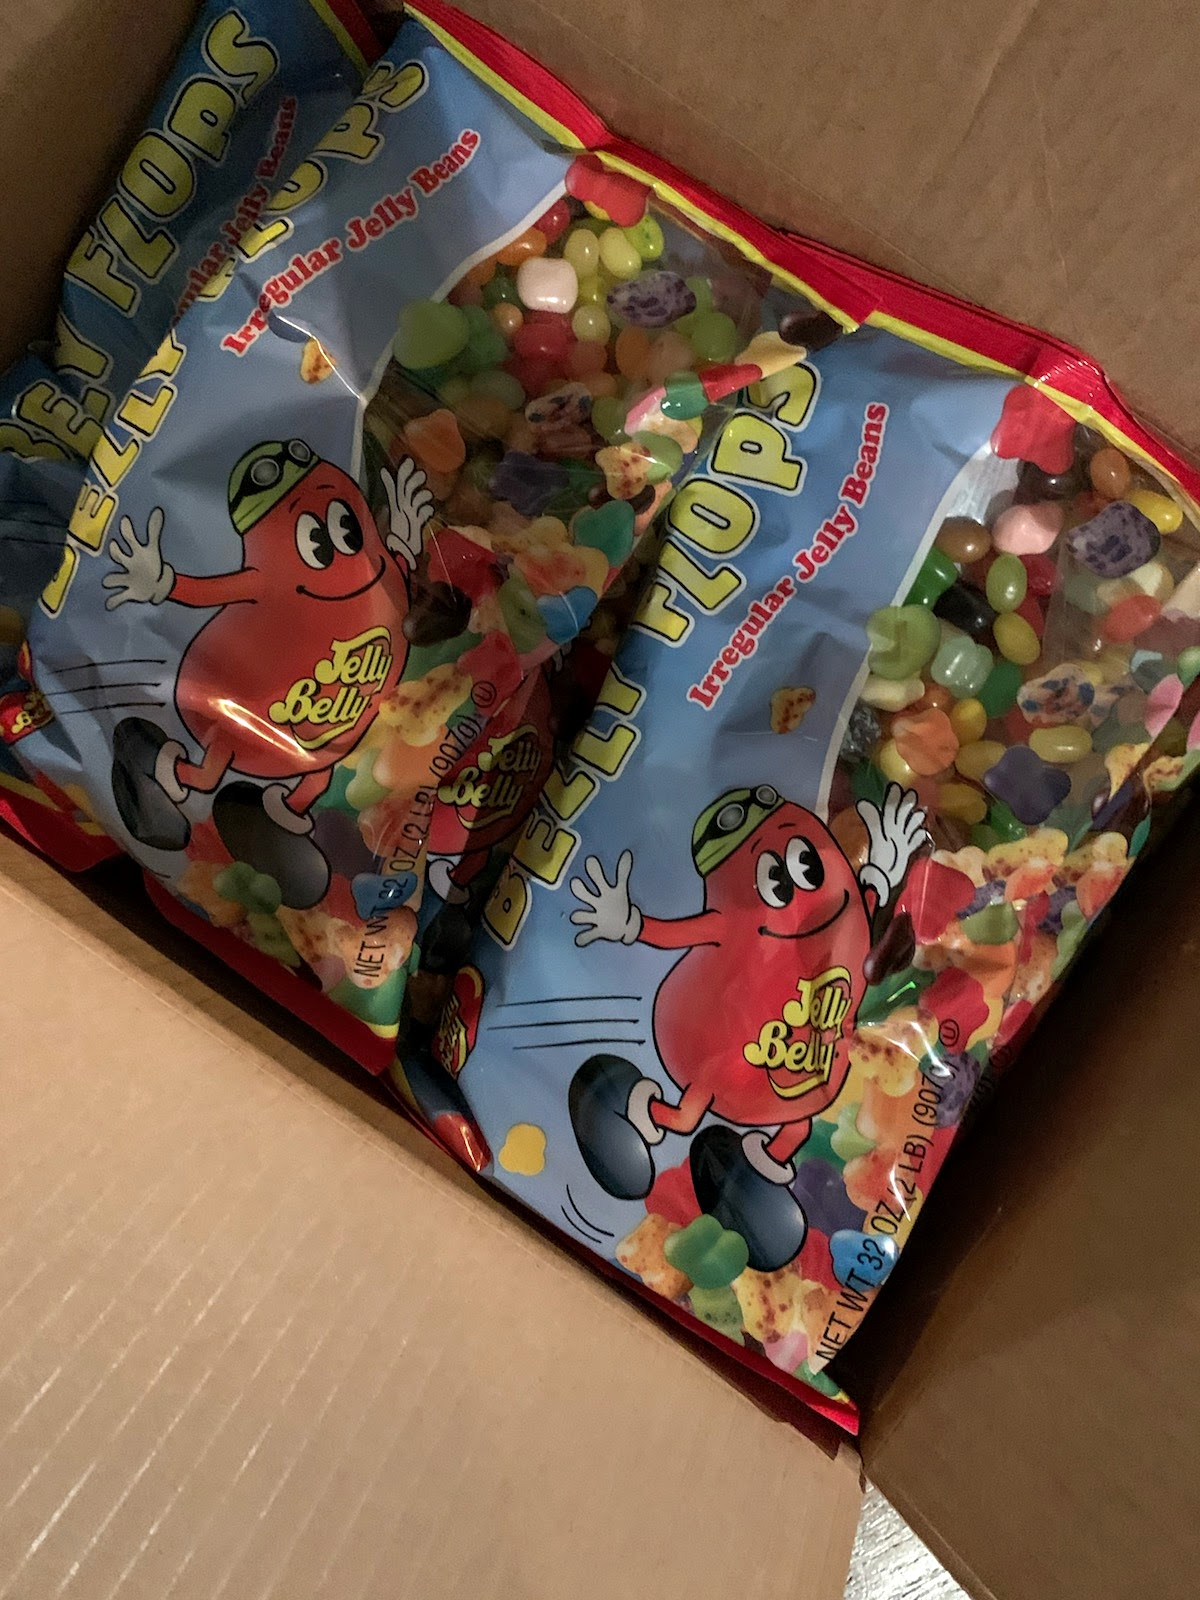 Open box revealing bags full of Jelly Belly's Belly Flops